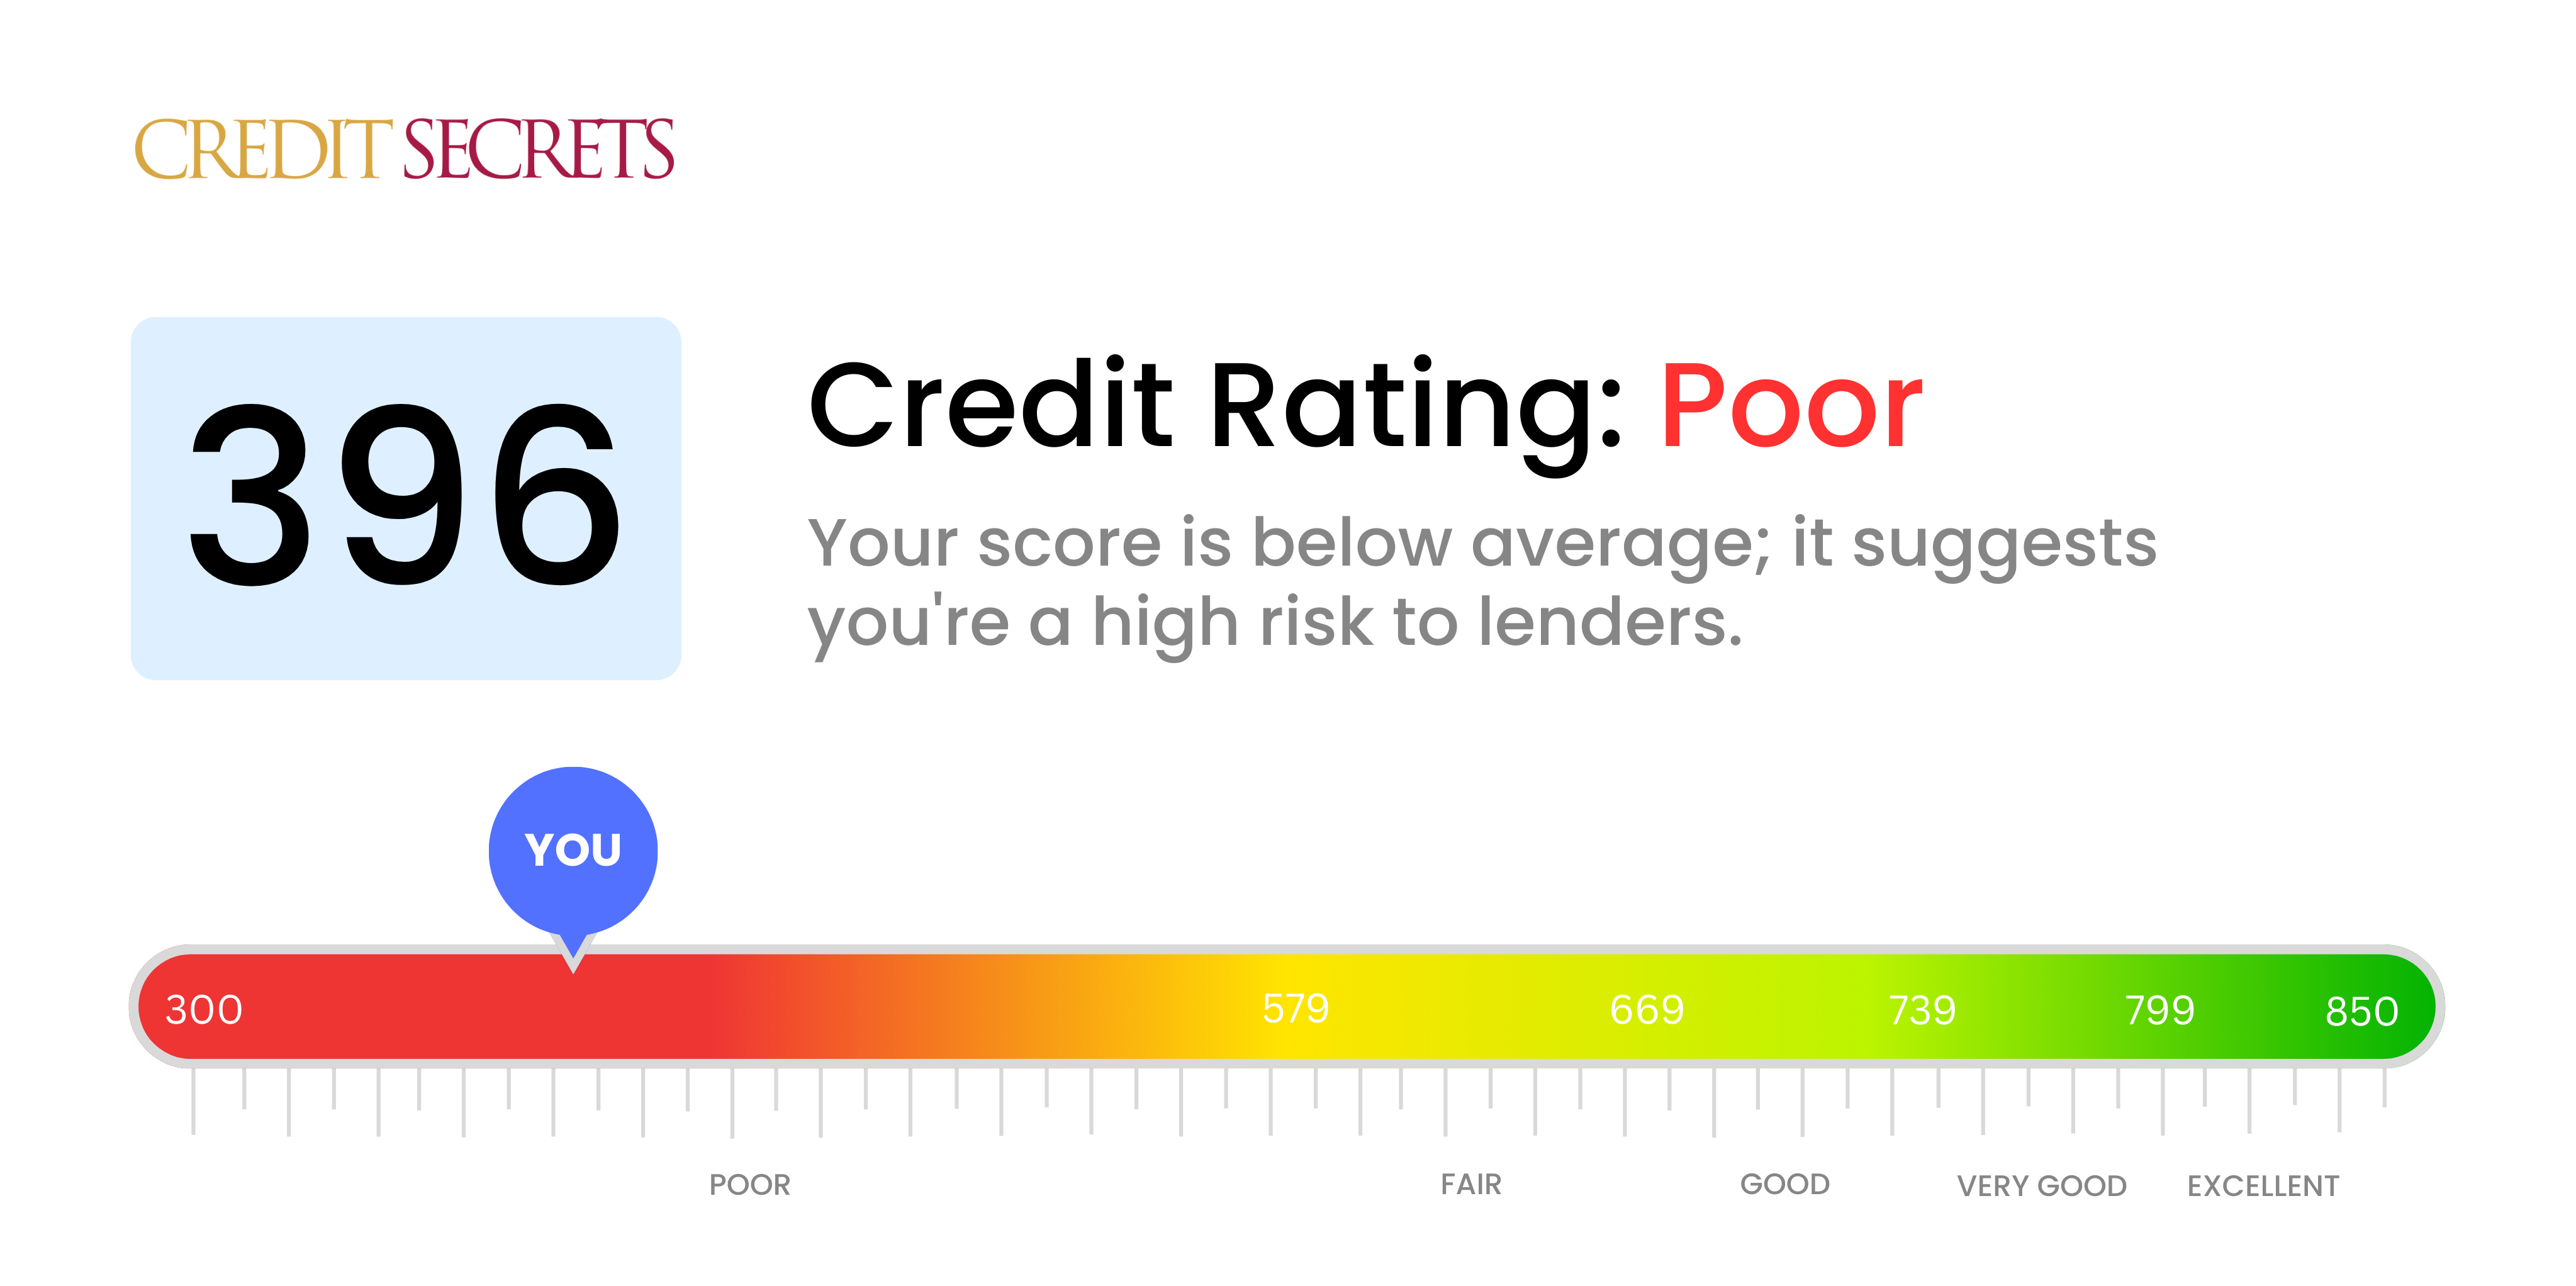 Is 396 a good credit score?